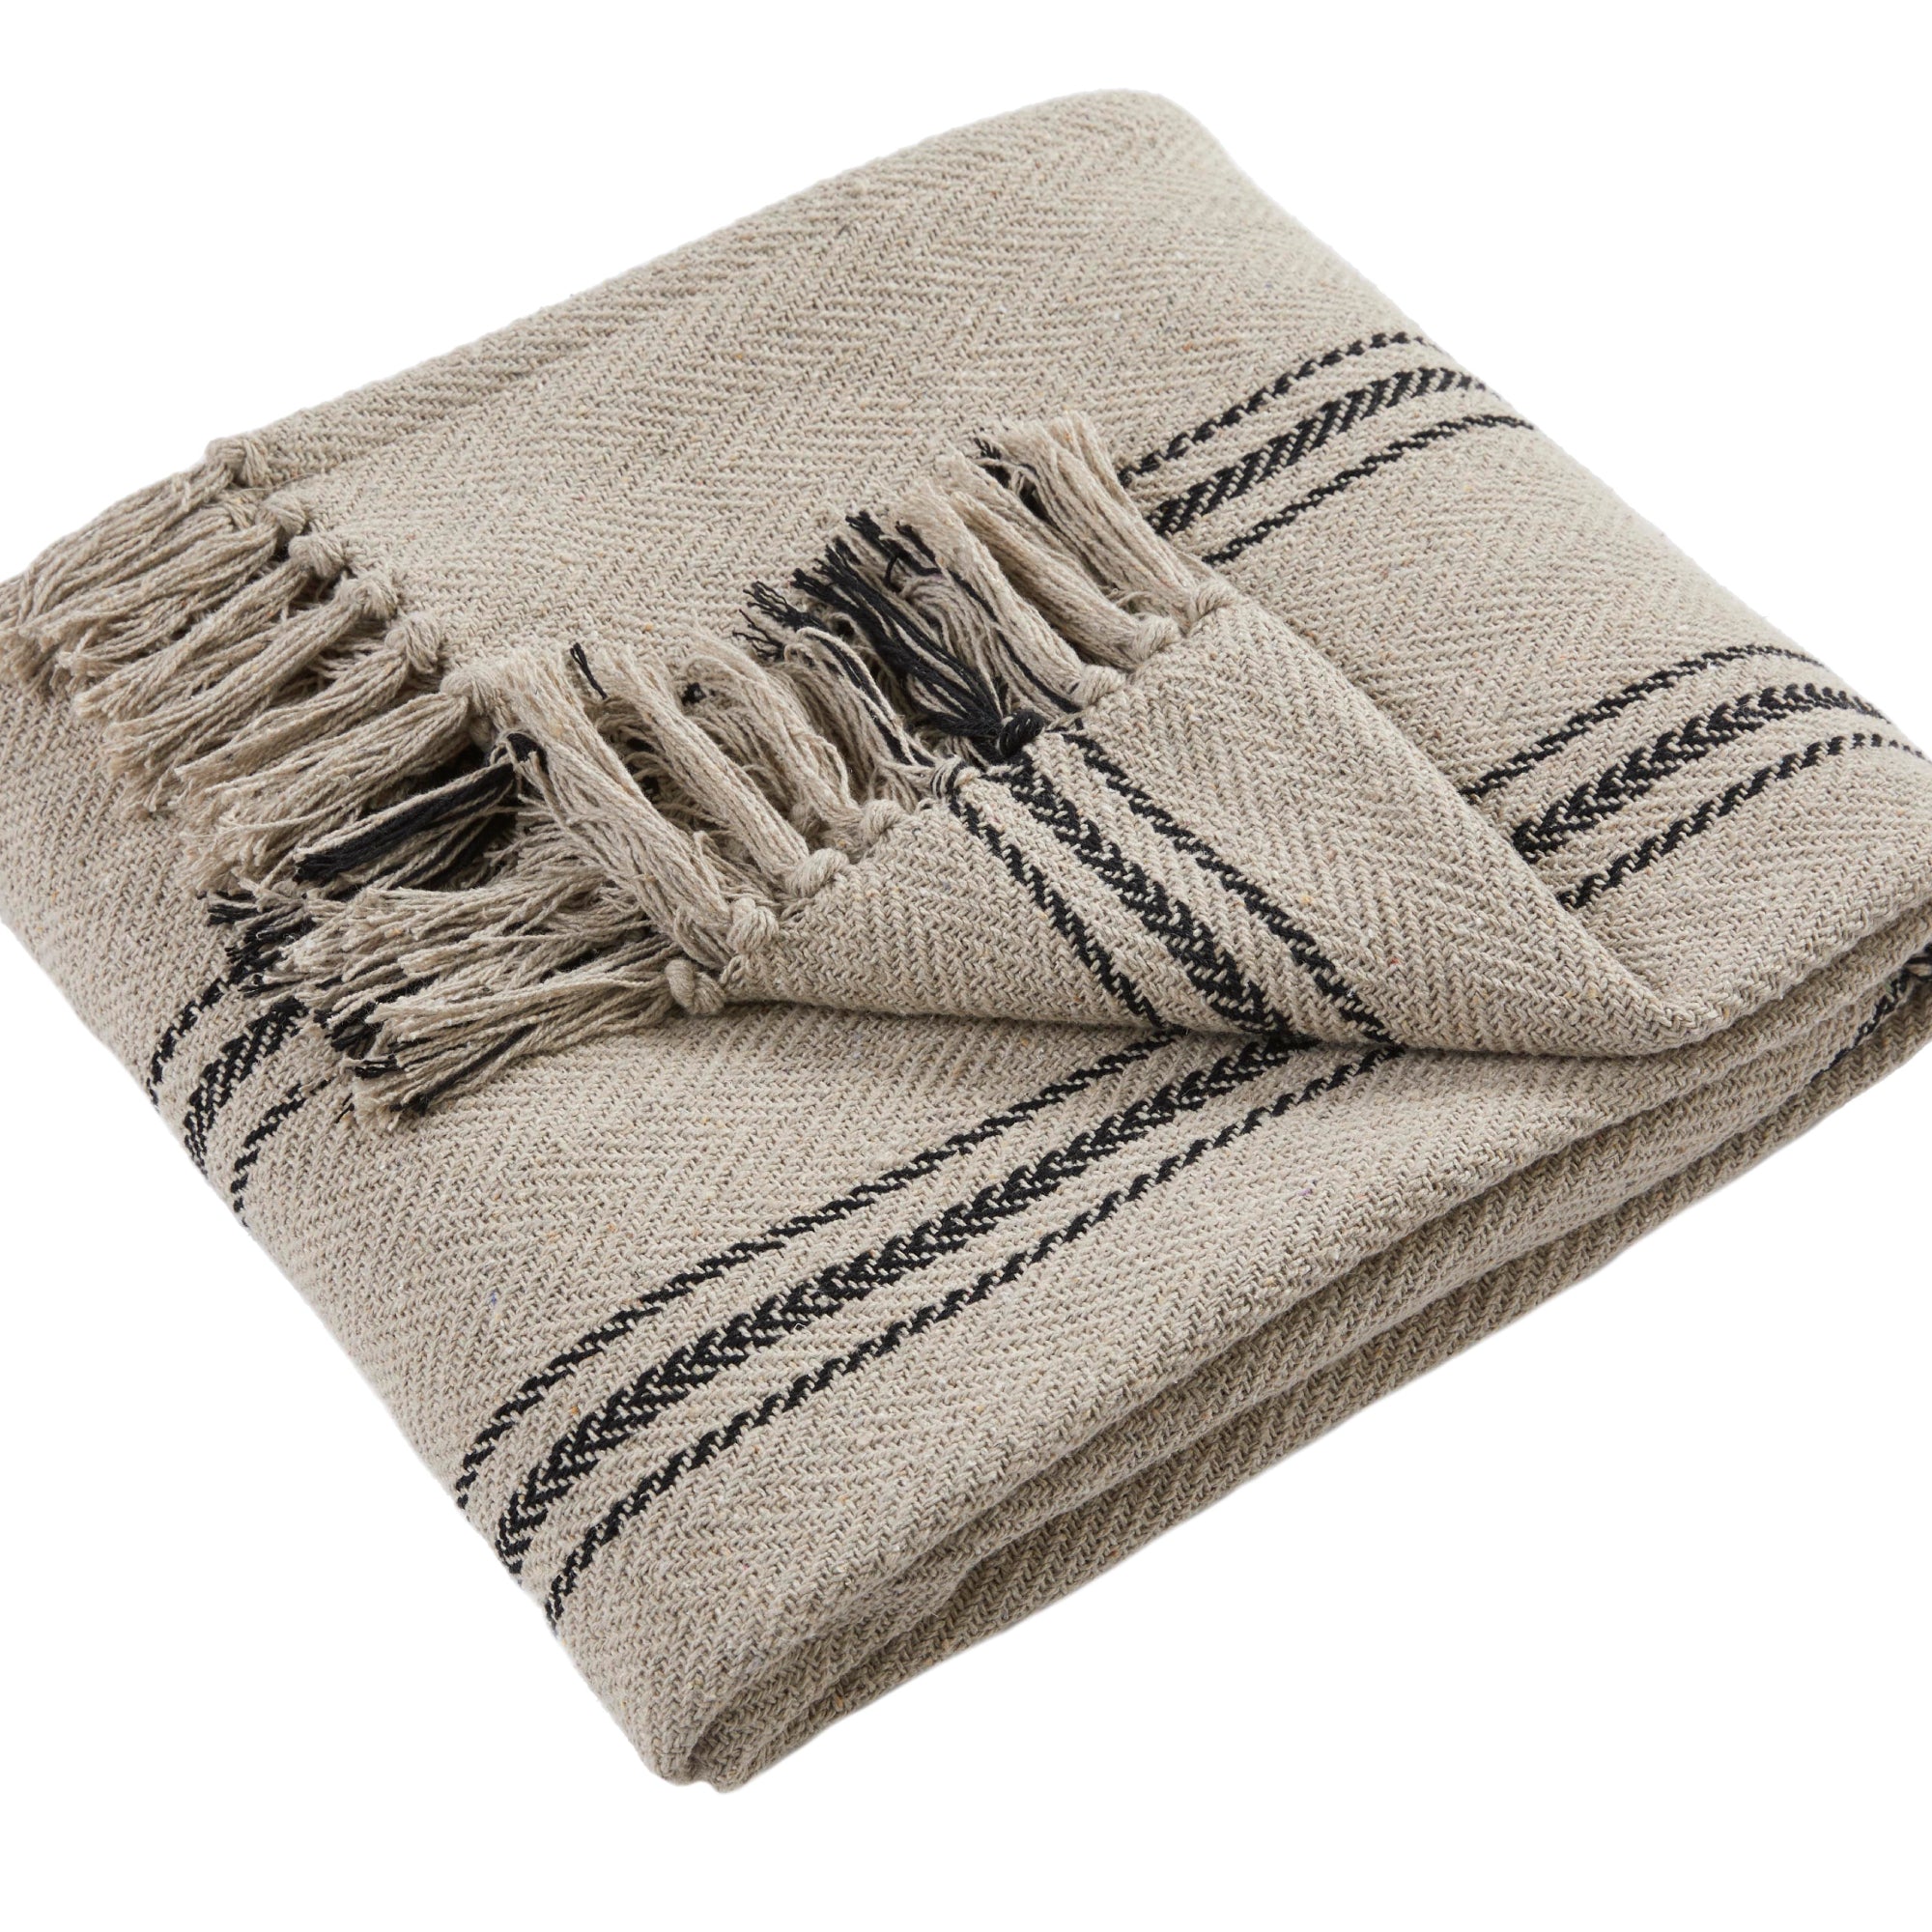 Drift Home Brinley Recycled Cotton Throw - Natural